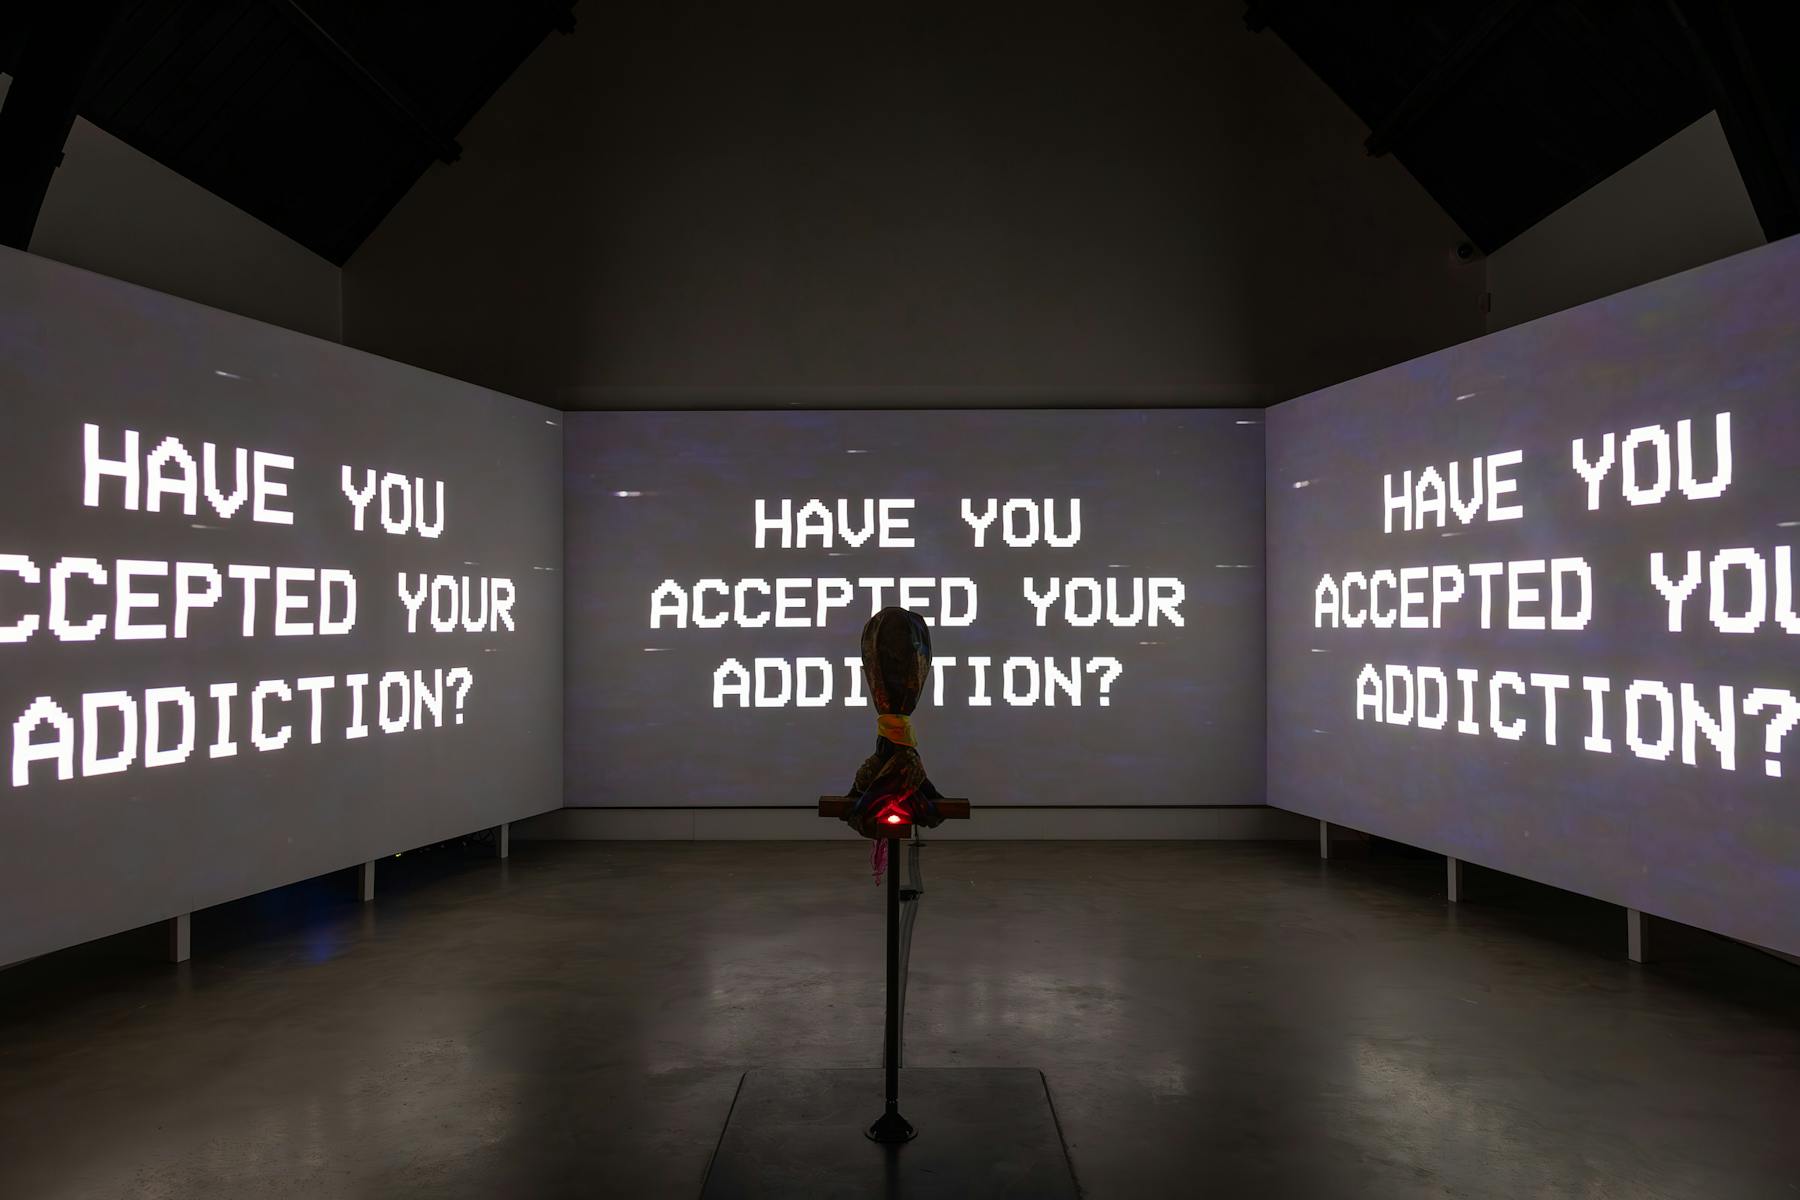 a photograph of three screens that are projected with black and white text. There is text that reads 'HAVE YOU ACCEPTED YOUR ADDICTION'. In the foreground there is a hooded object on a stand. 